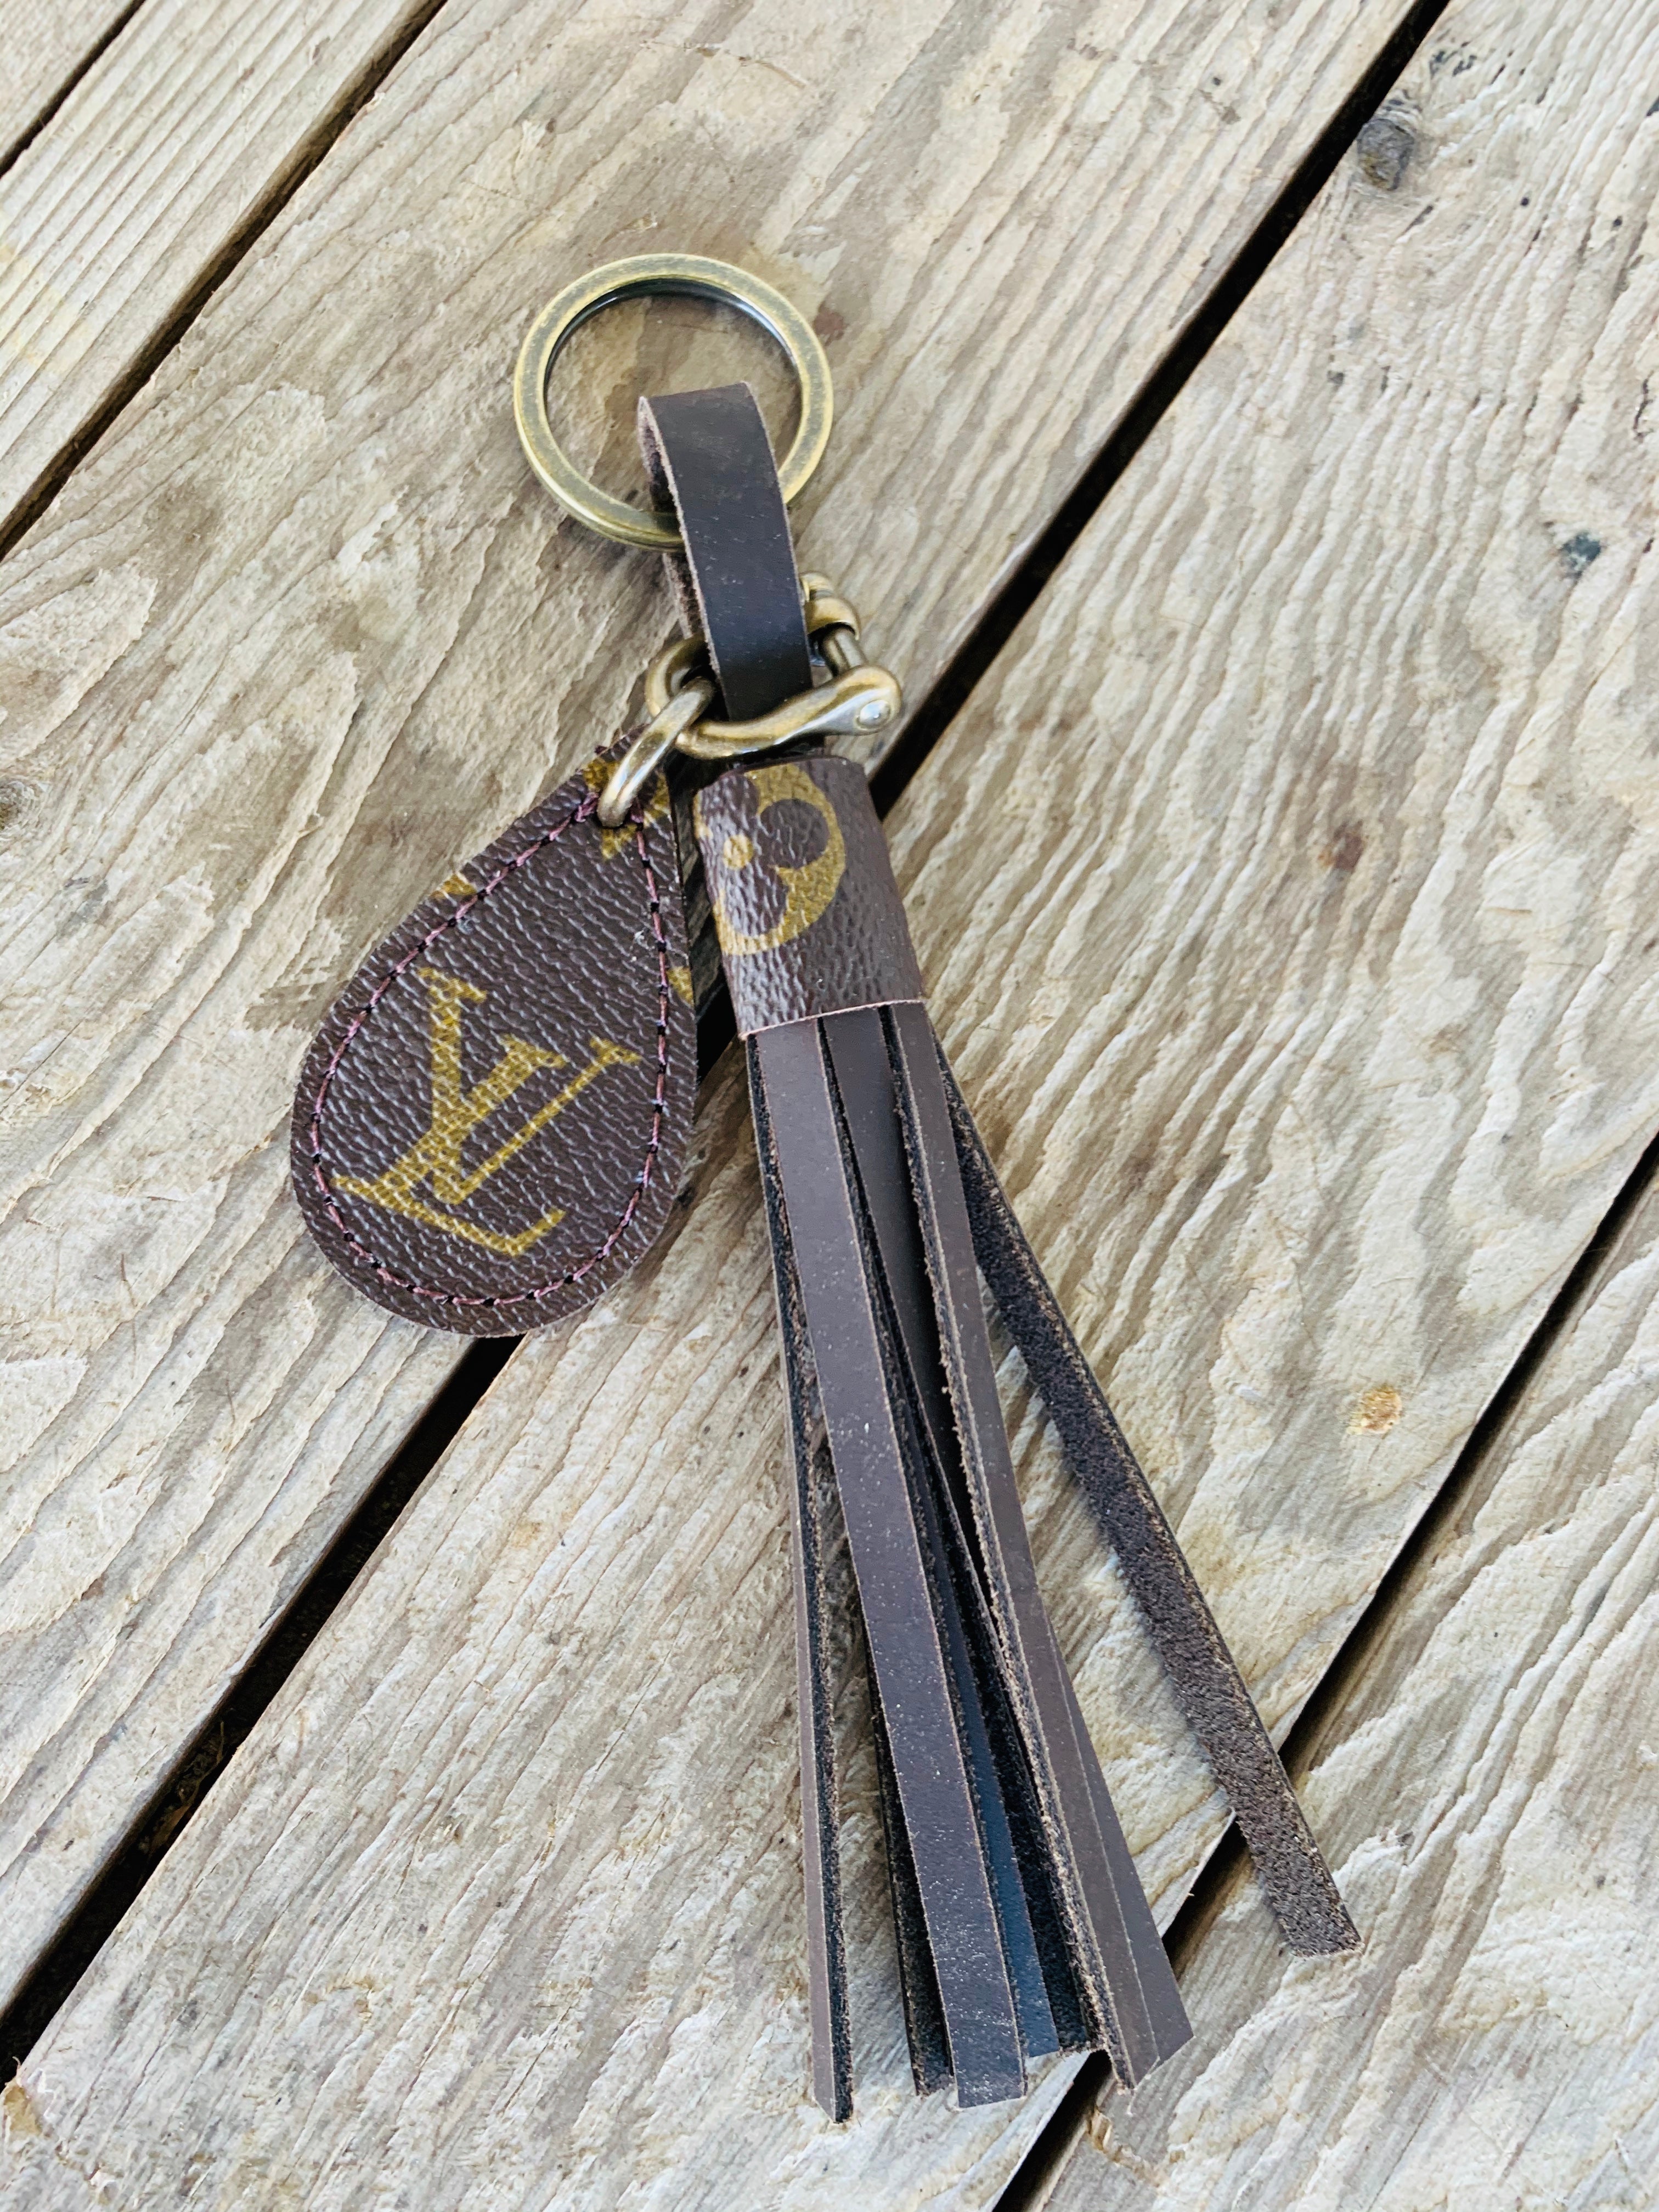 Received a decade-old LV keychain as a gift, ring doesn't open